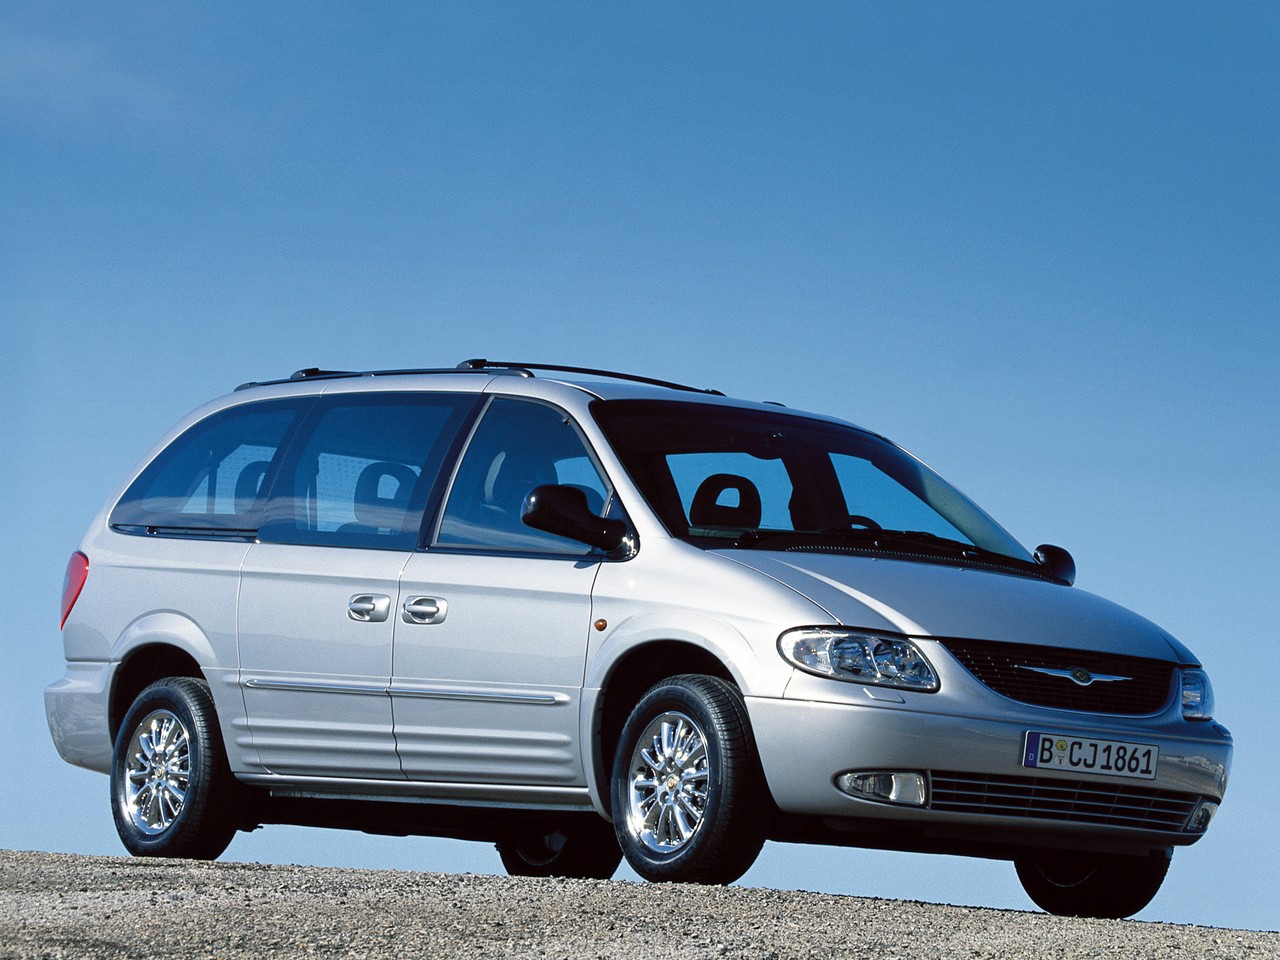 Chrysler RS Grand Voyager Review: 2001 to 2007